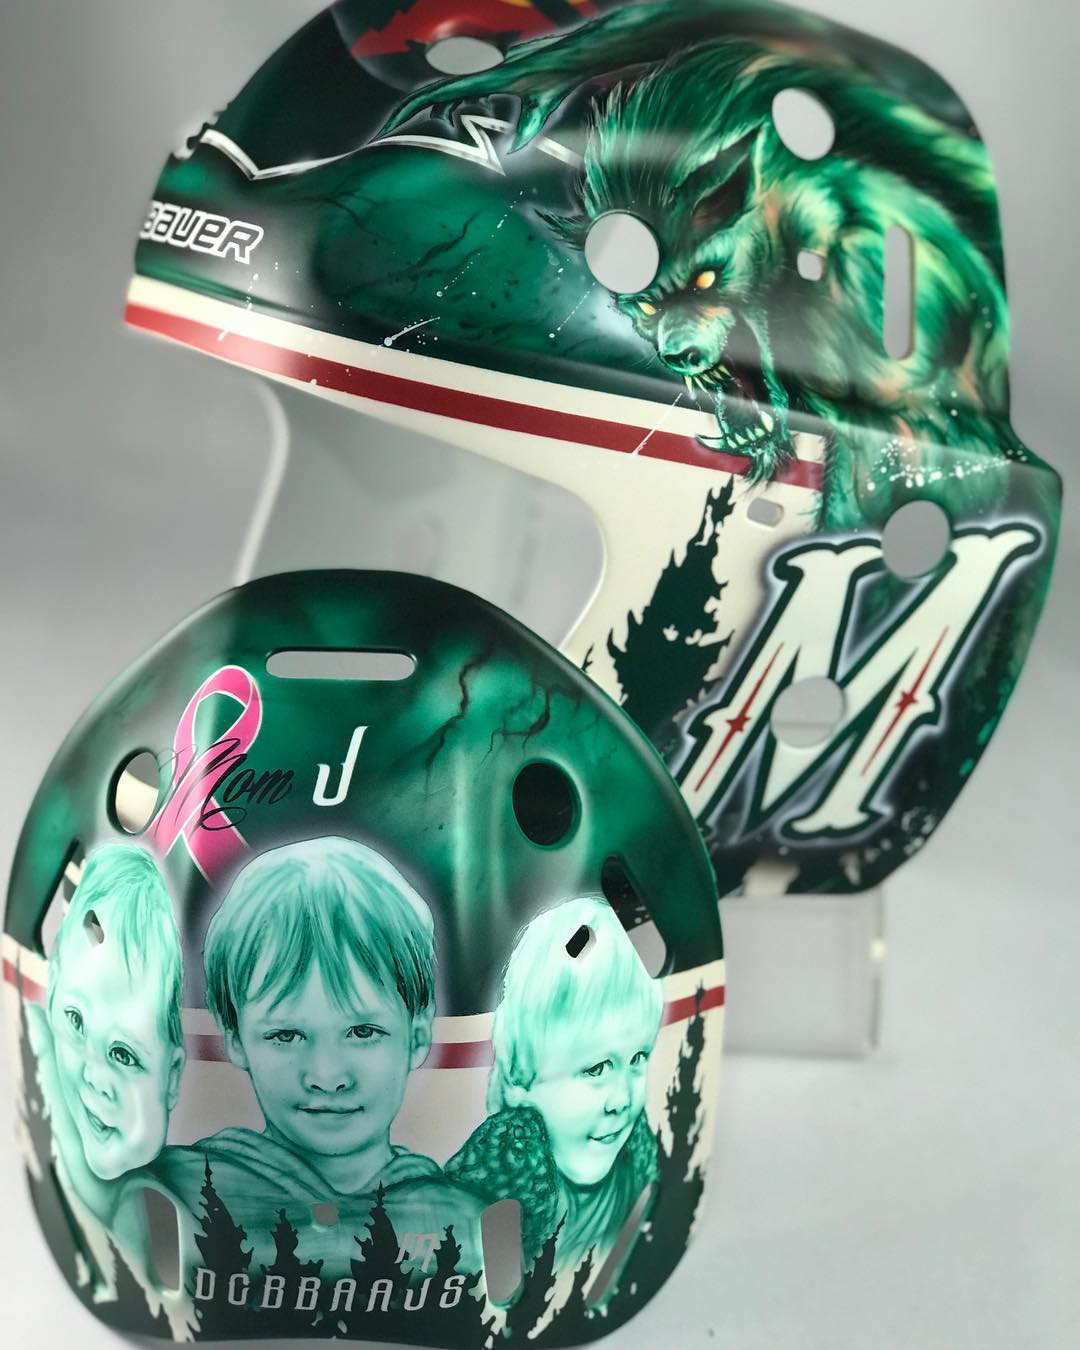 Devan Dubnyk's new mask might be his best one yet - Article - Bardown